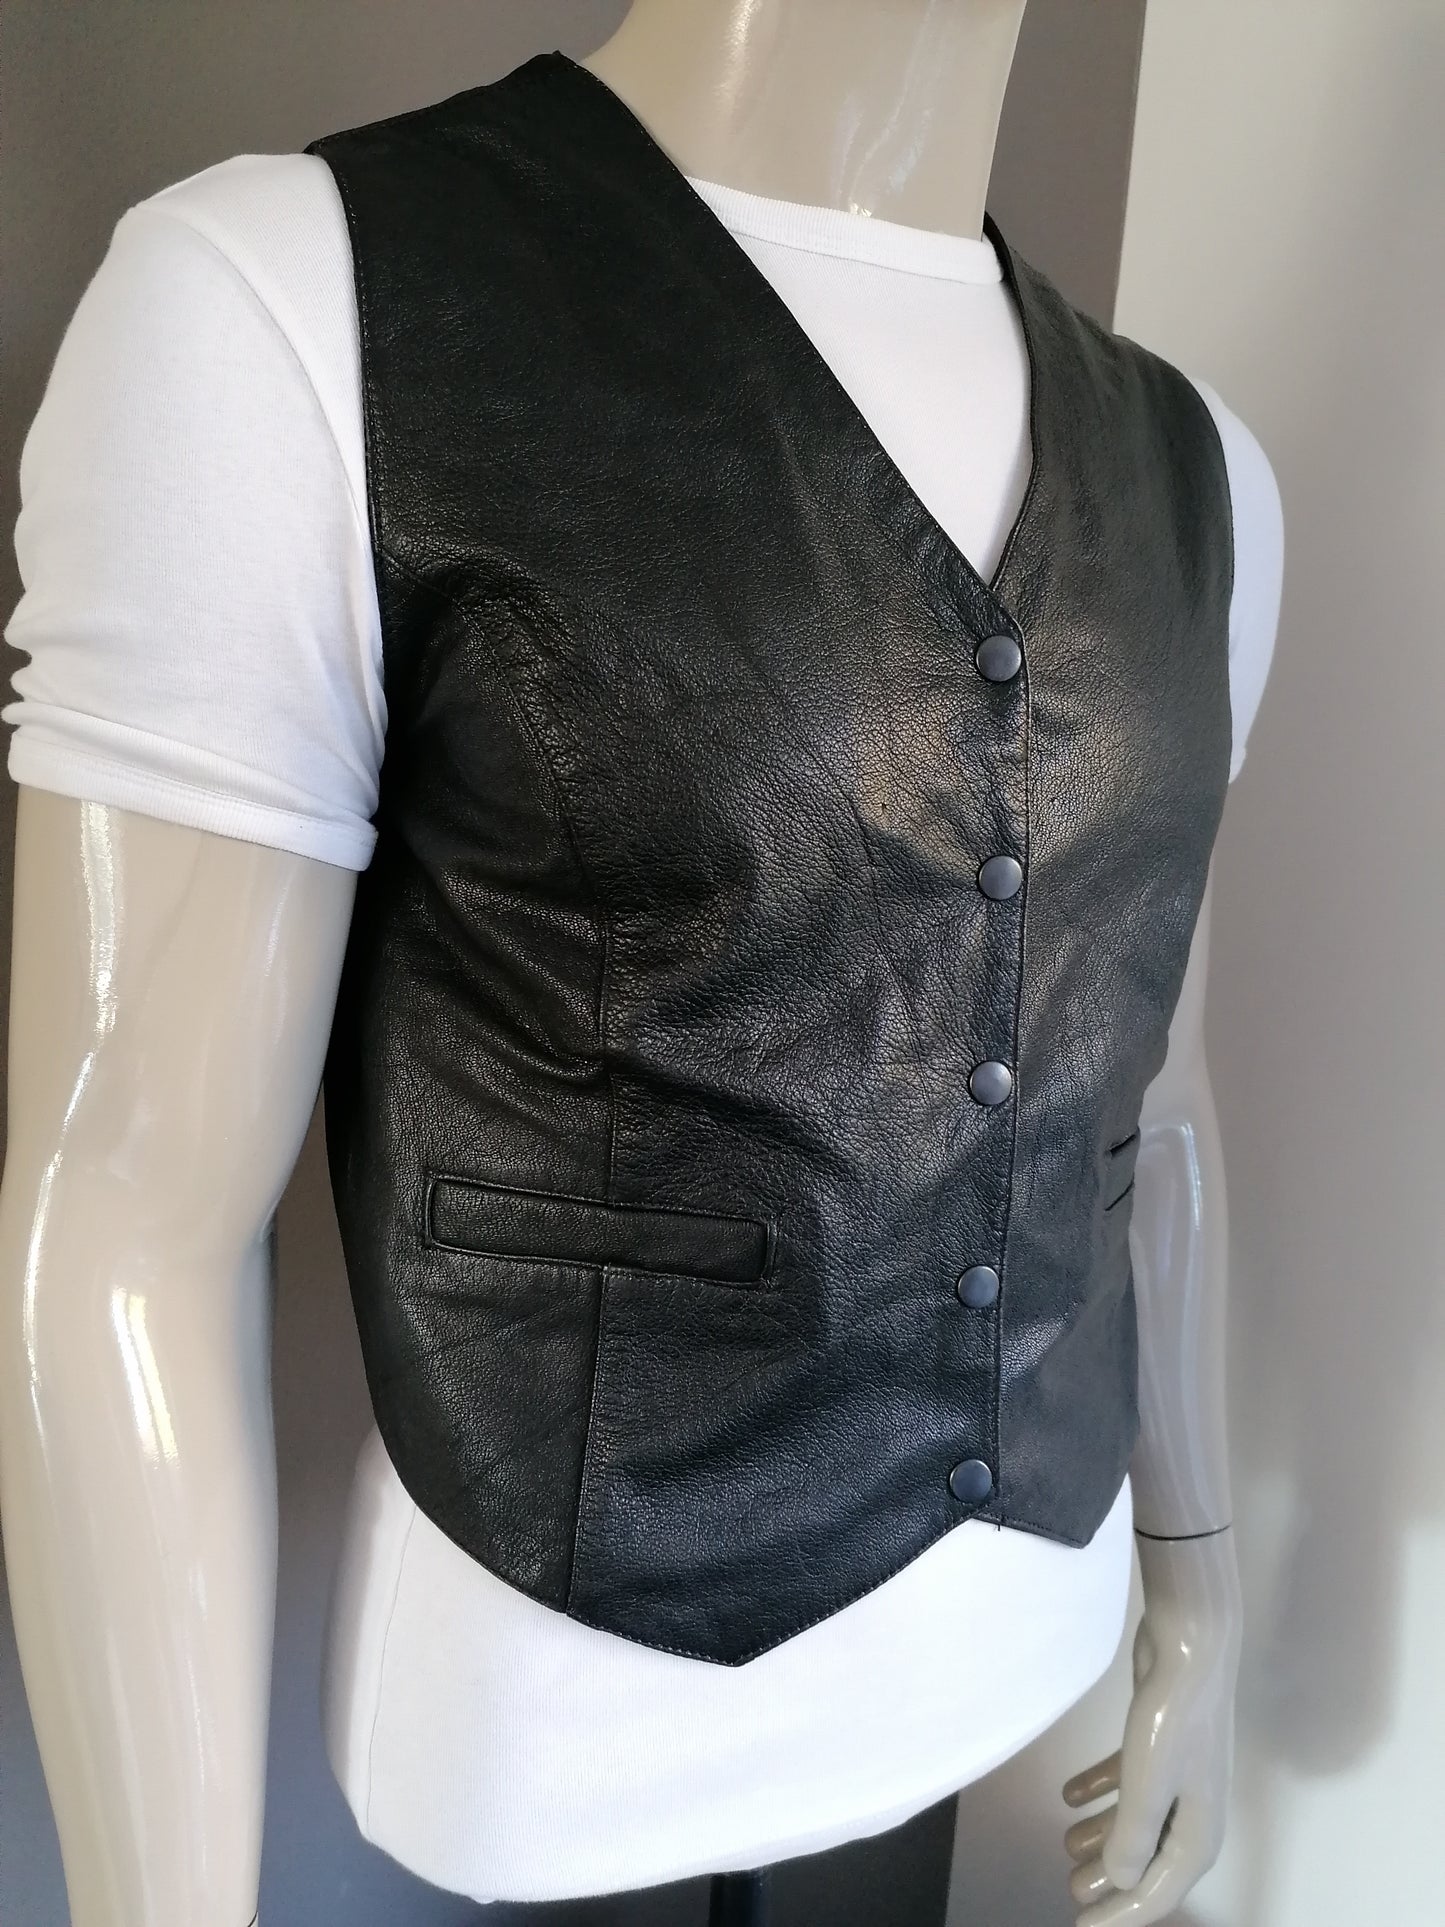 Leather waistcoat with press studs. Colored black. Size M. # 253